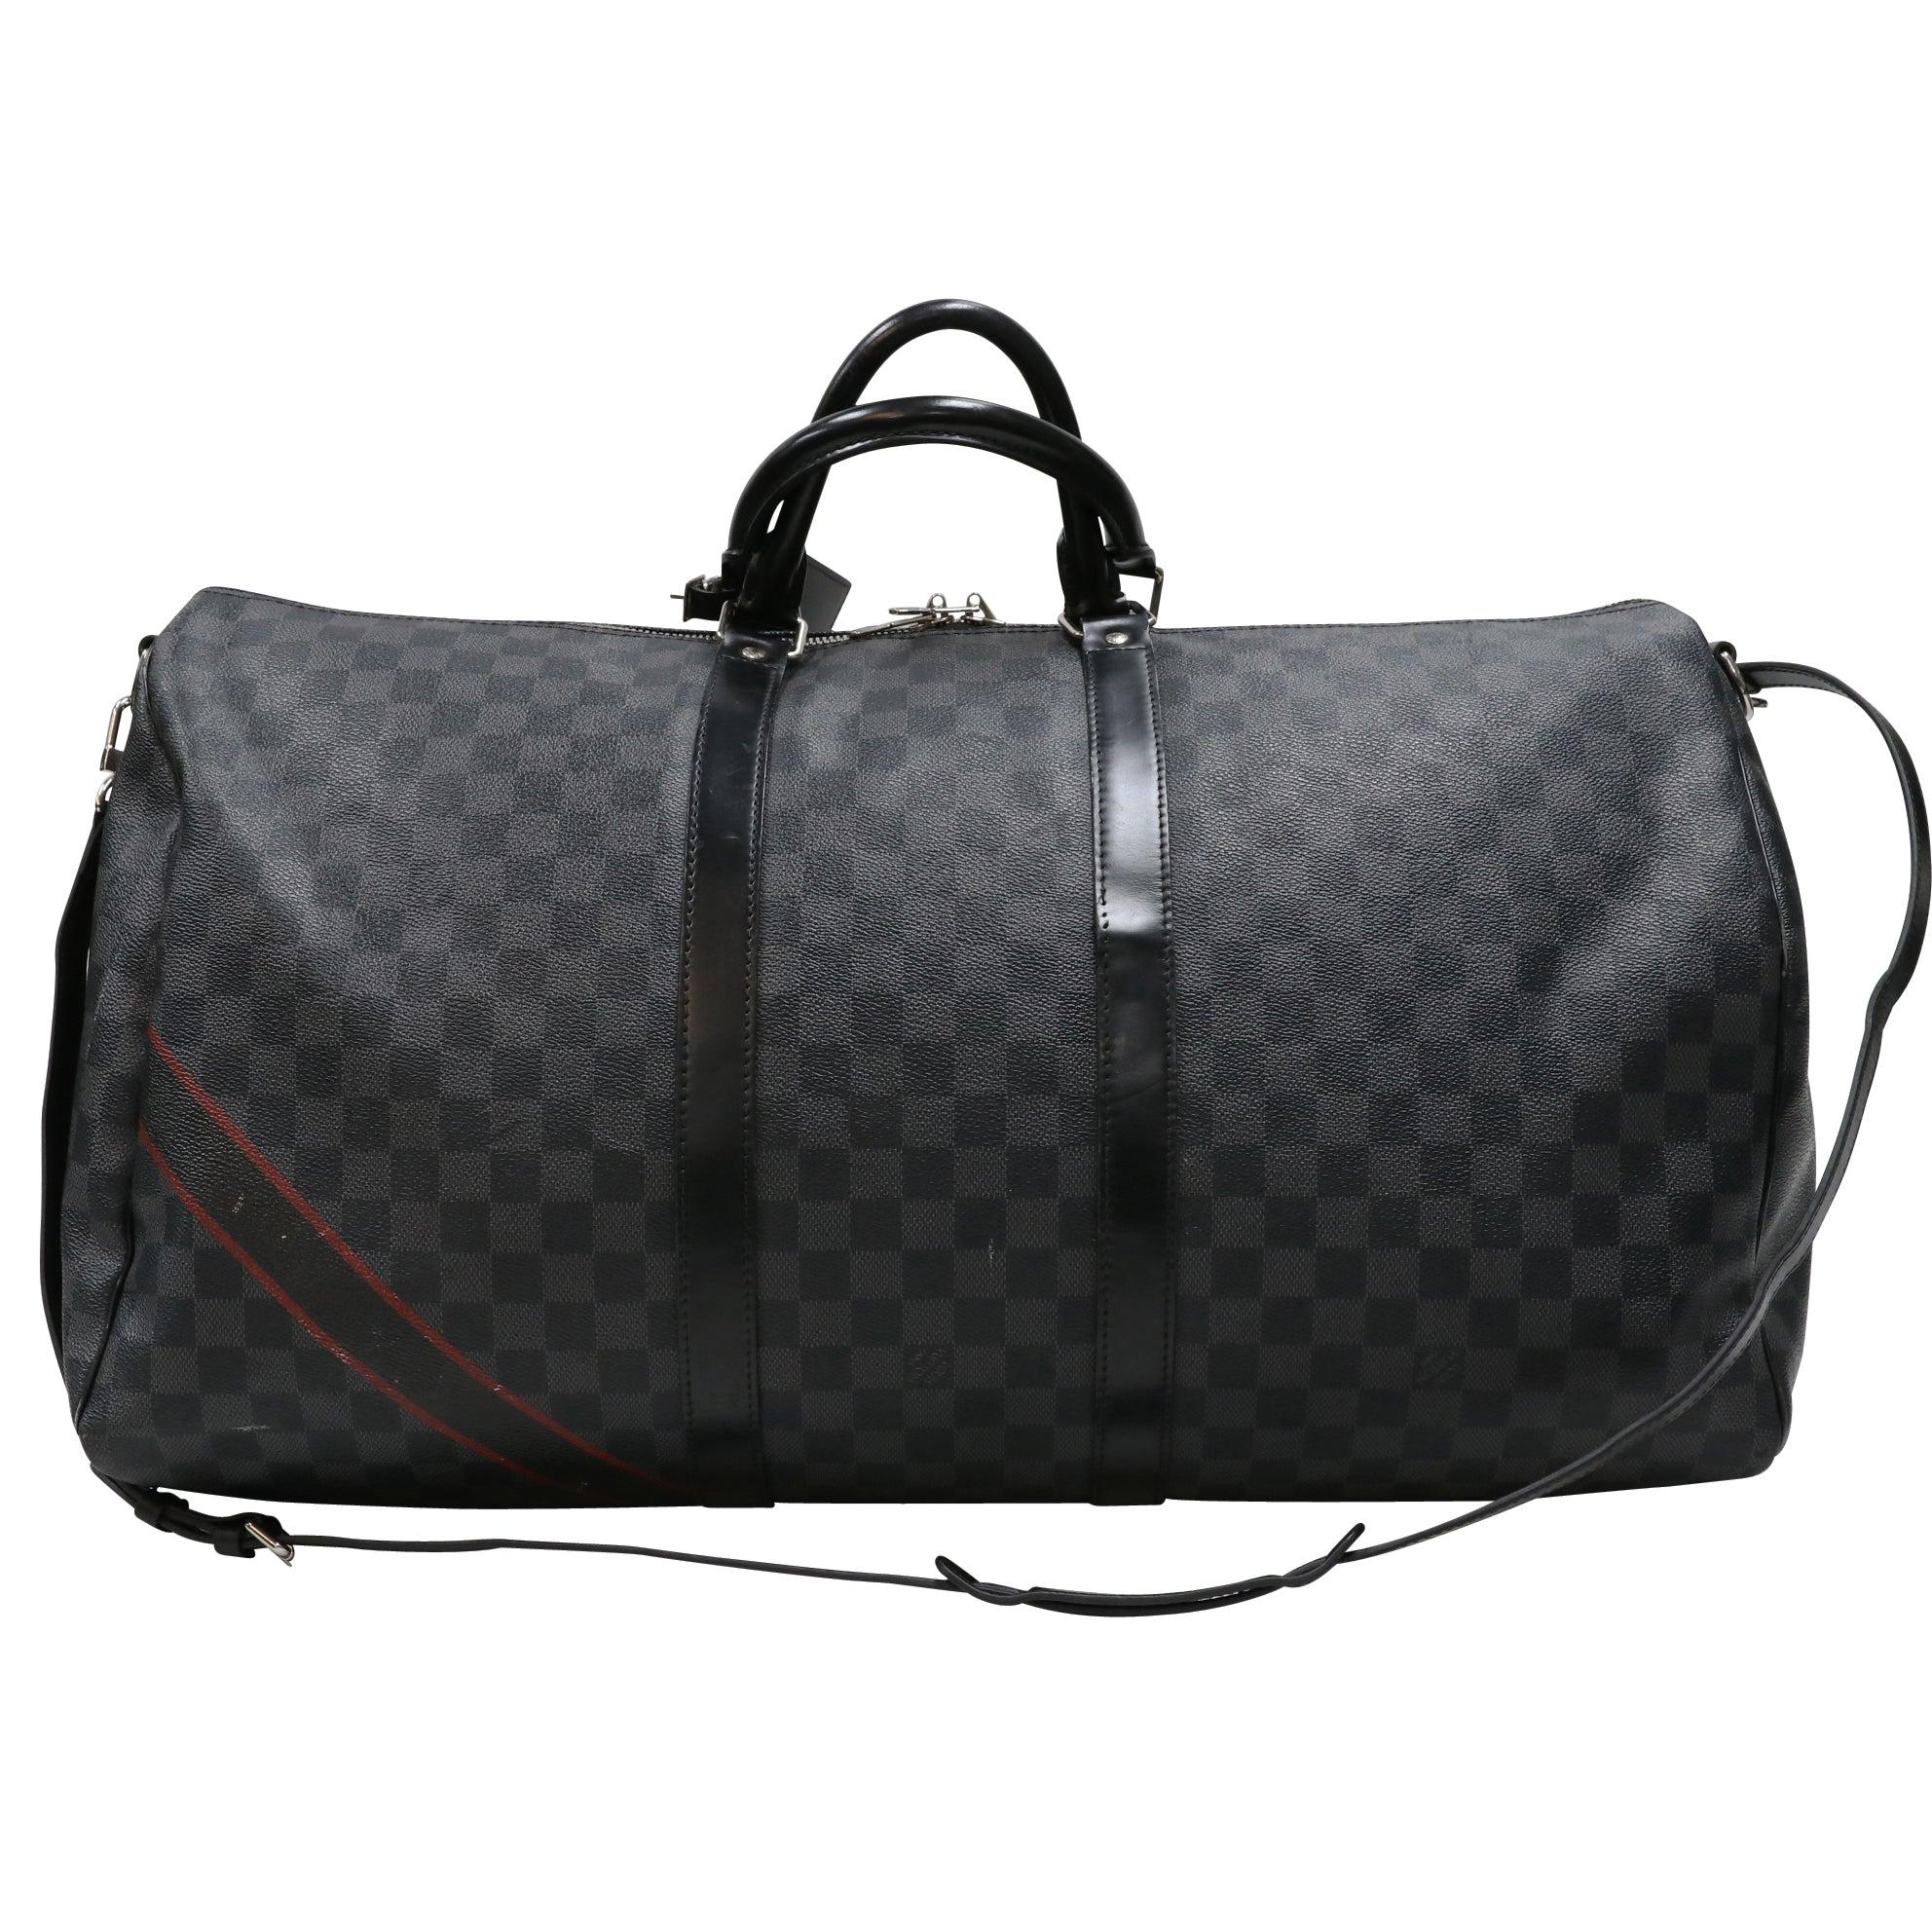 Introducing the Louis Vuitton Keepall 55 Damier Graphite! This is the perfect travel bag for any trip or adventure. With plenty of room to store clothes or anything else you might need, this bag has got you covered while making you look stylish.